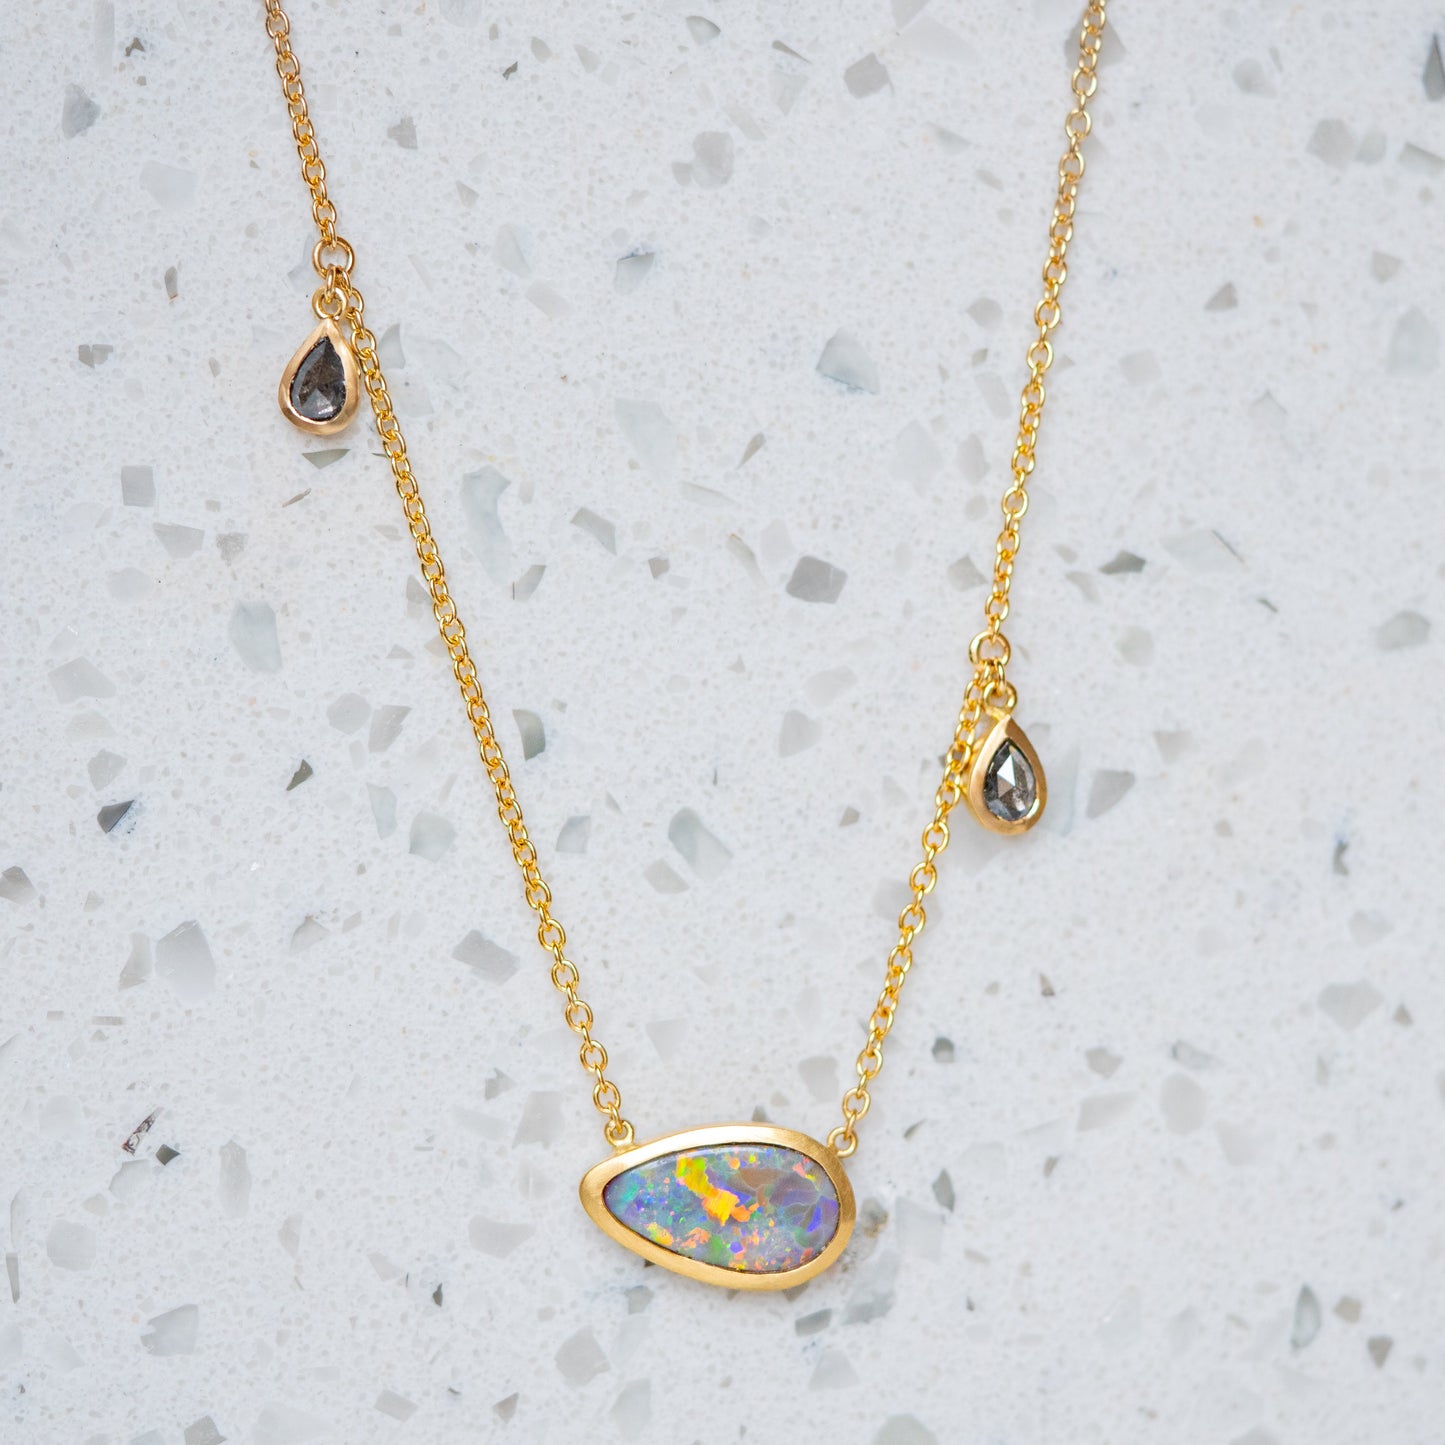 One-off Black Opal and Salt & Pepper Diamond Necklace, 18ct Yellow Gold (In Stock)